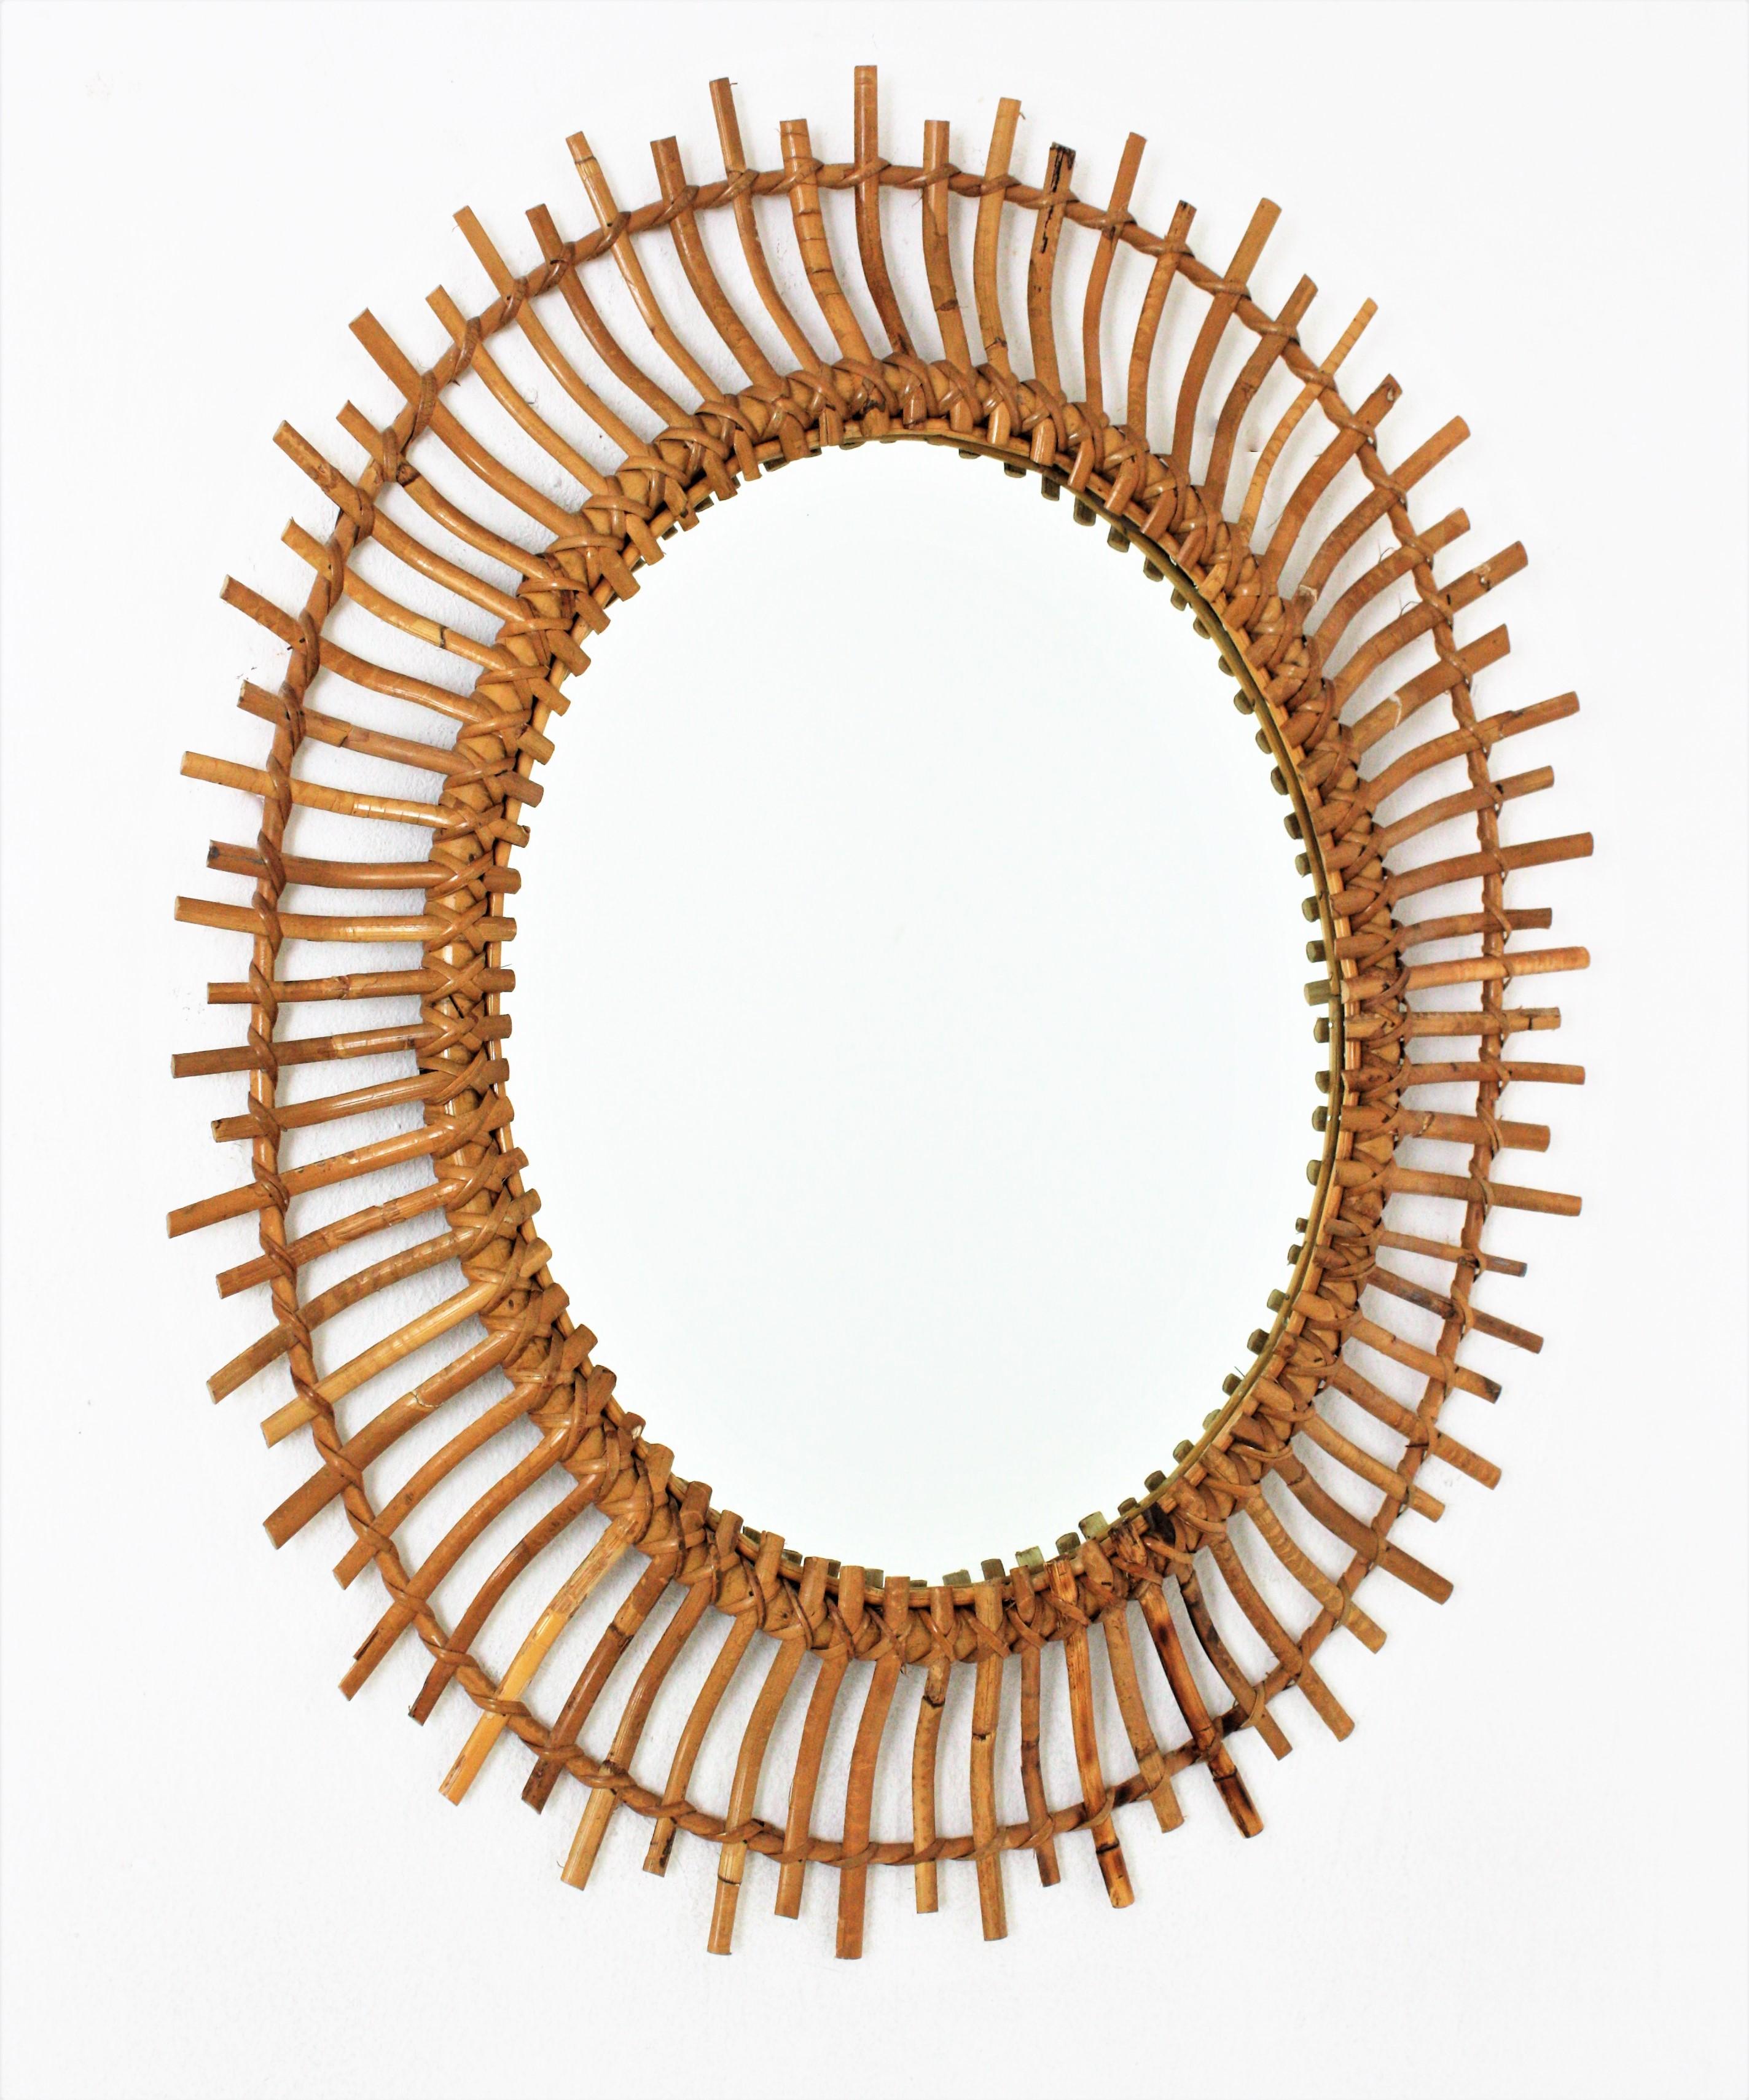 Amazing bamboo and rattan sunburst oval mirror. Handcrafted in Spain, 1960s.
It has all the taste and freshness of the Mediterranean Coast.
Lovely placed alone or as a part of a rattan mirrors wall composition.
This rattan oval mirror is the